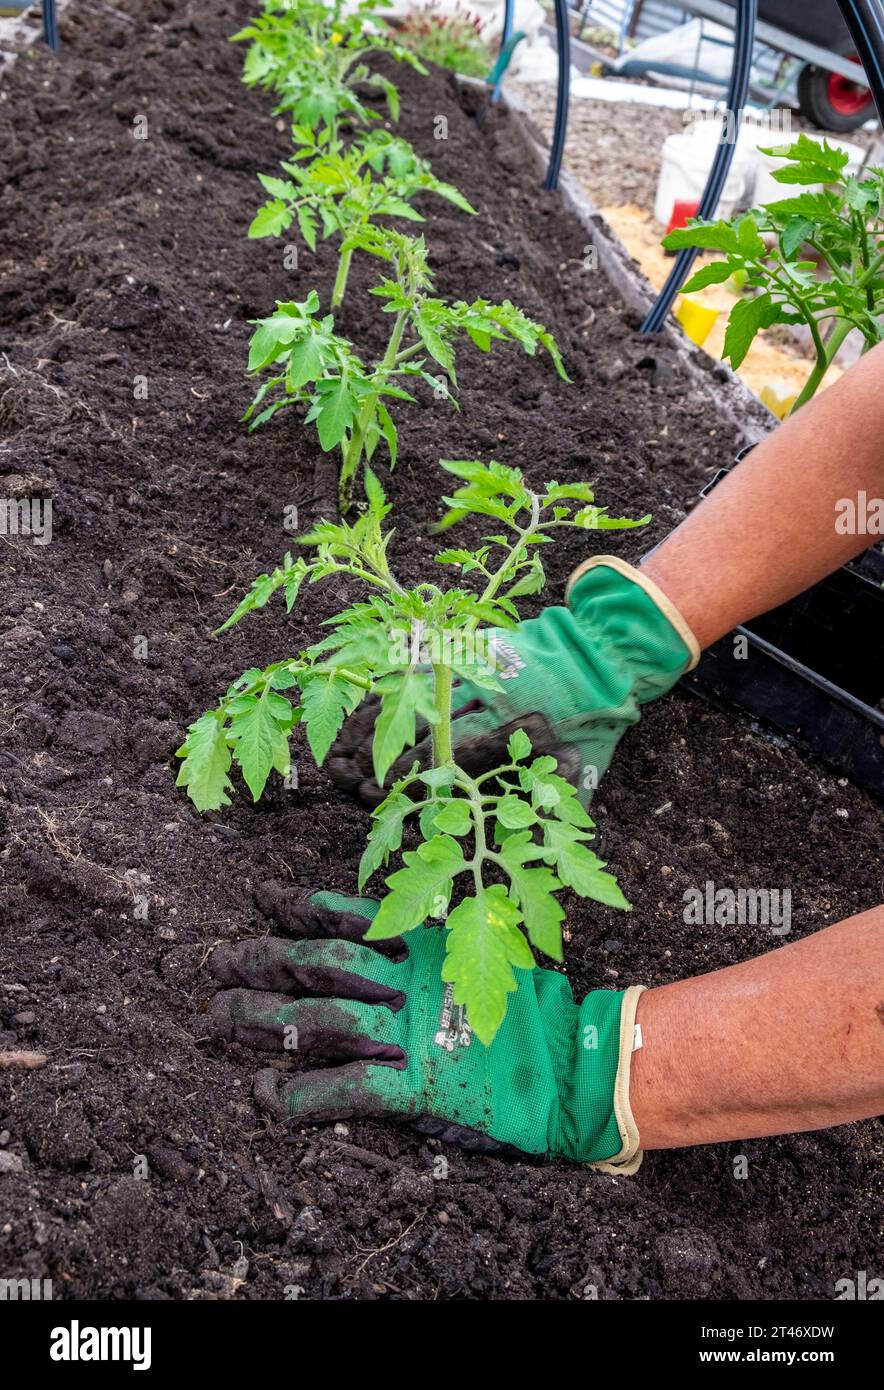 Planting out well hardened San Marzano tomato seedlings into a well-prepared garden bed with leaker hose irrigation network Stock Photo